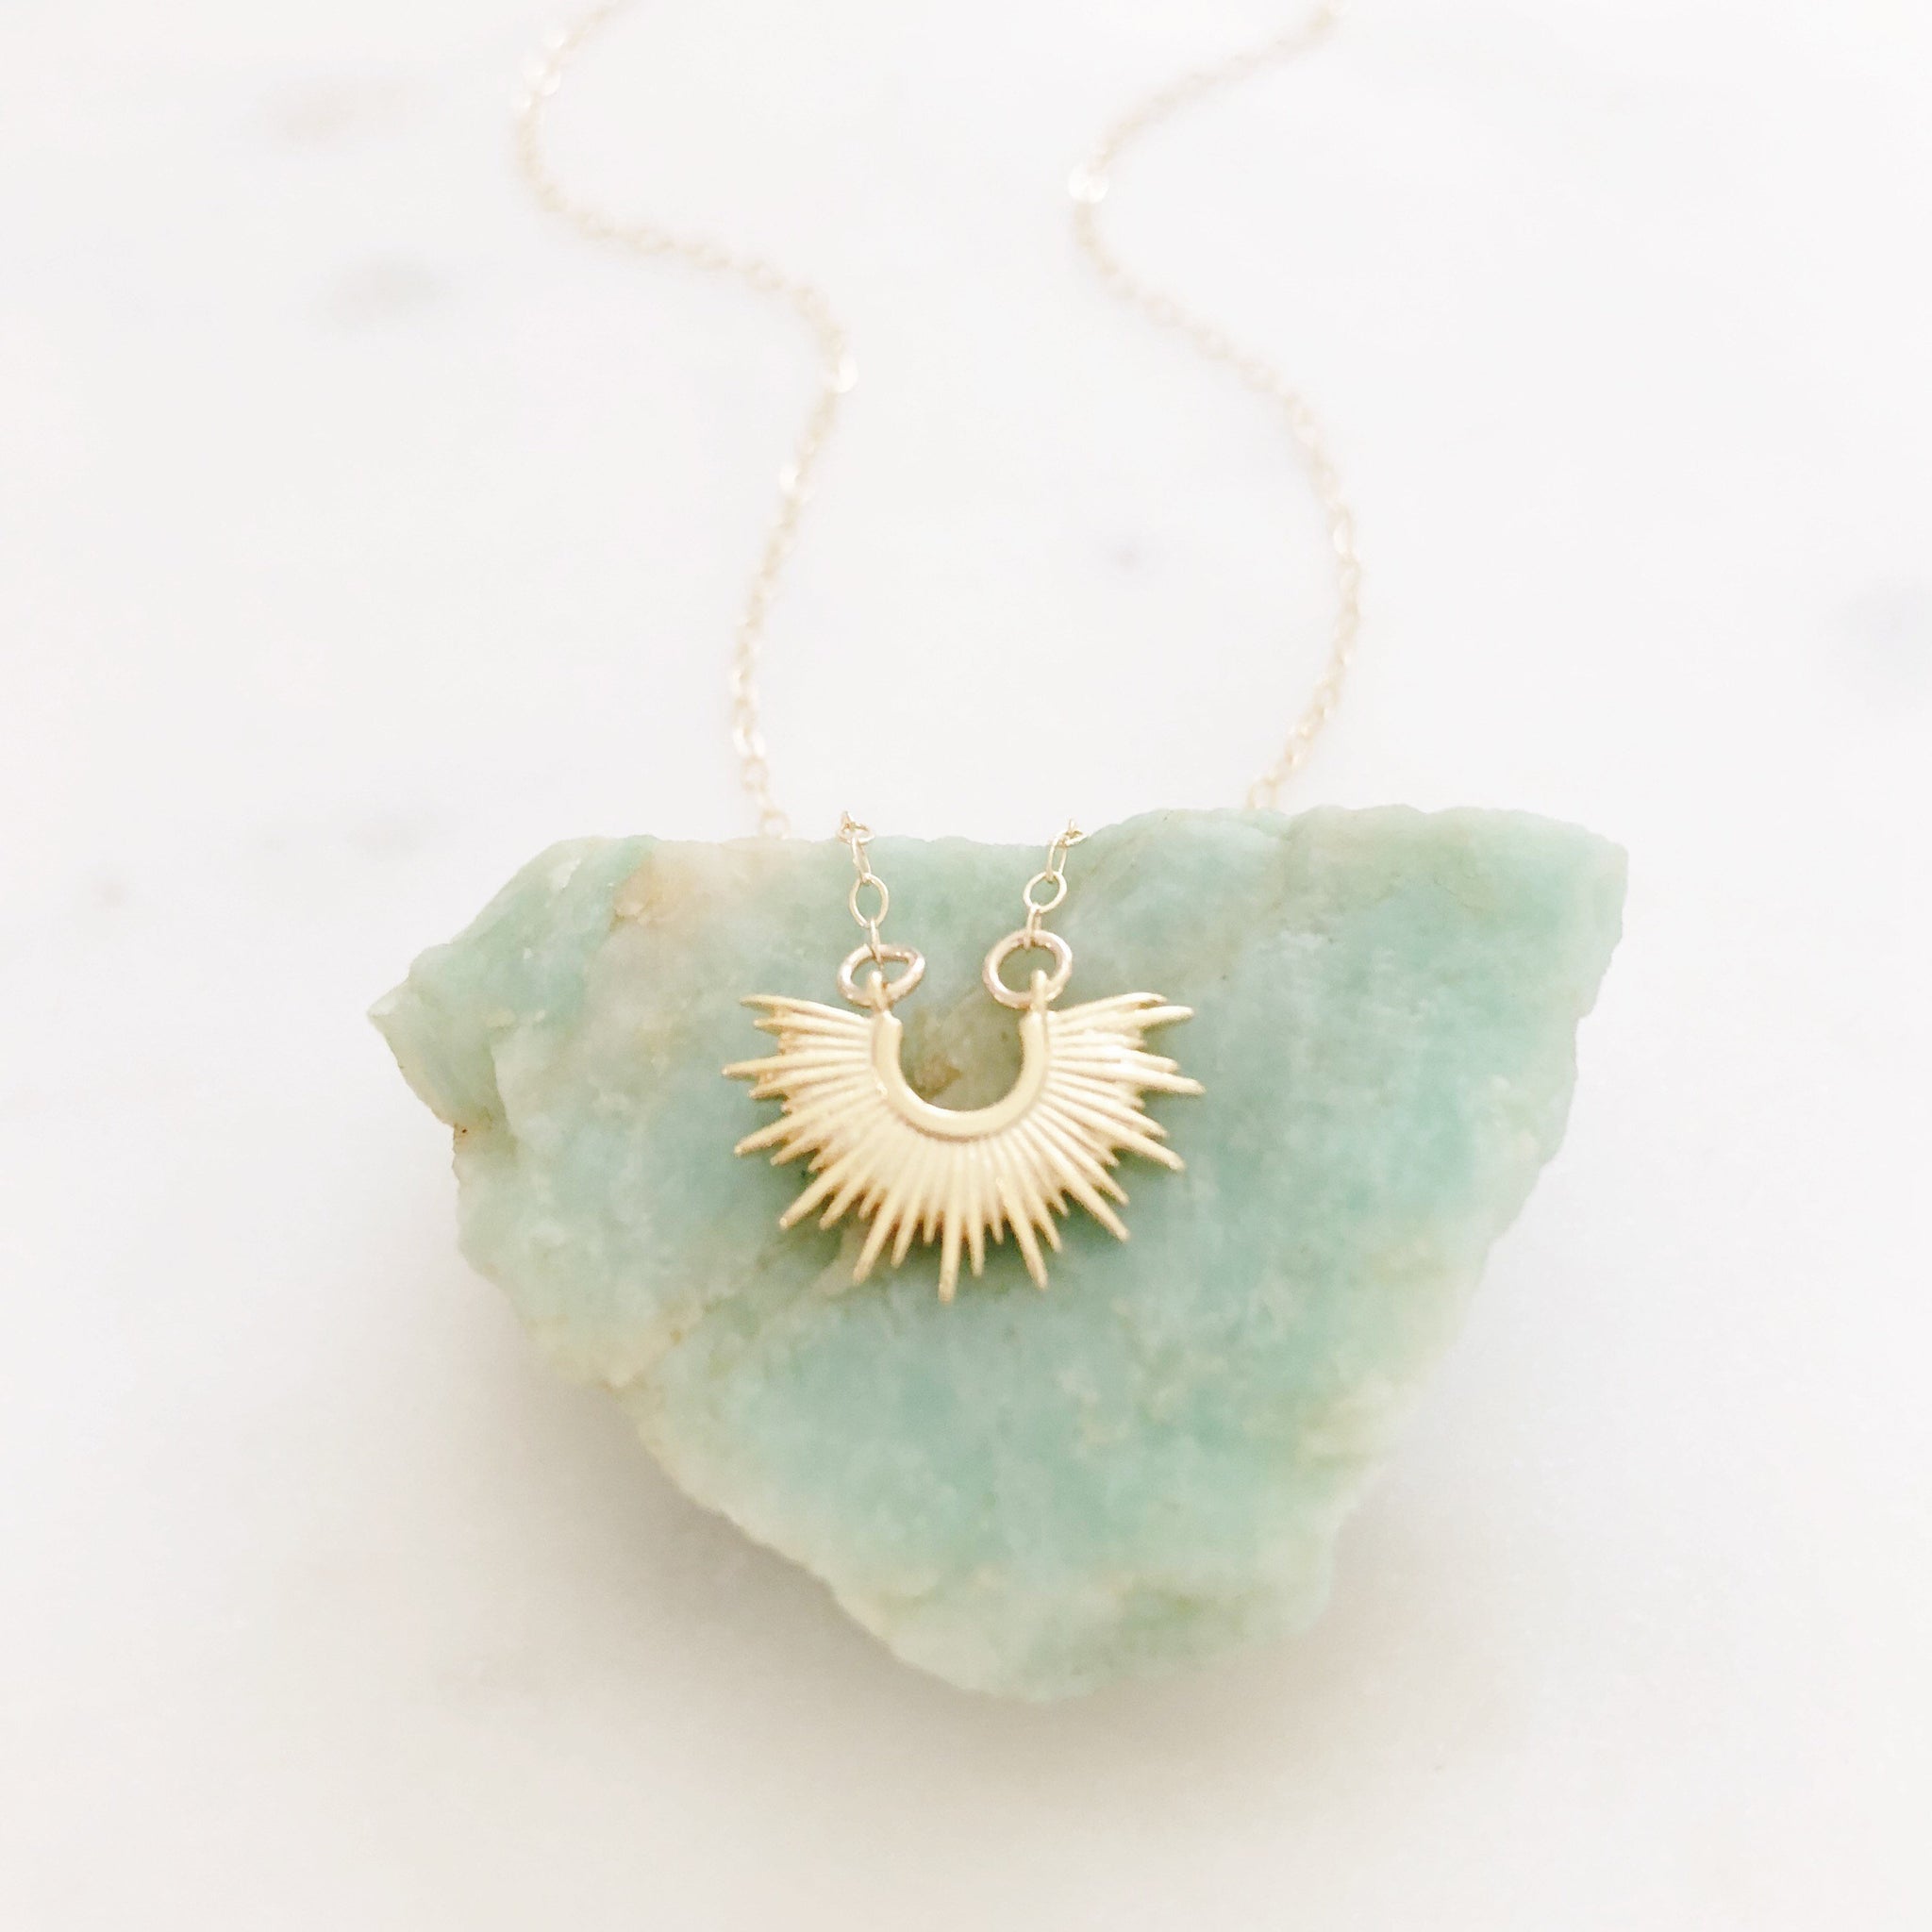 Gold Sun Necklace, Celestial Jewelry, Sunburst Necklace, Dainty Gold Necklace, Best Friend Gifts, Birthday Gifts for Her, SUNRISE